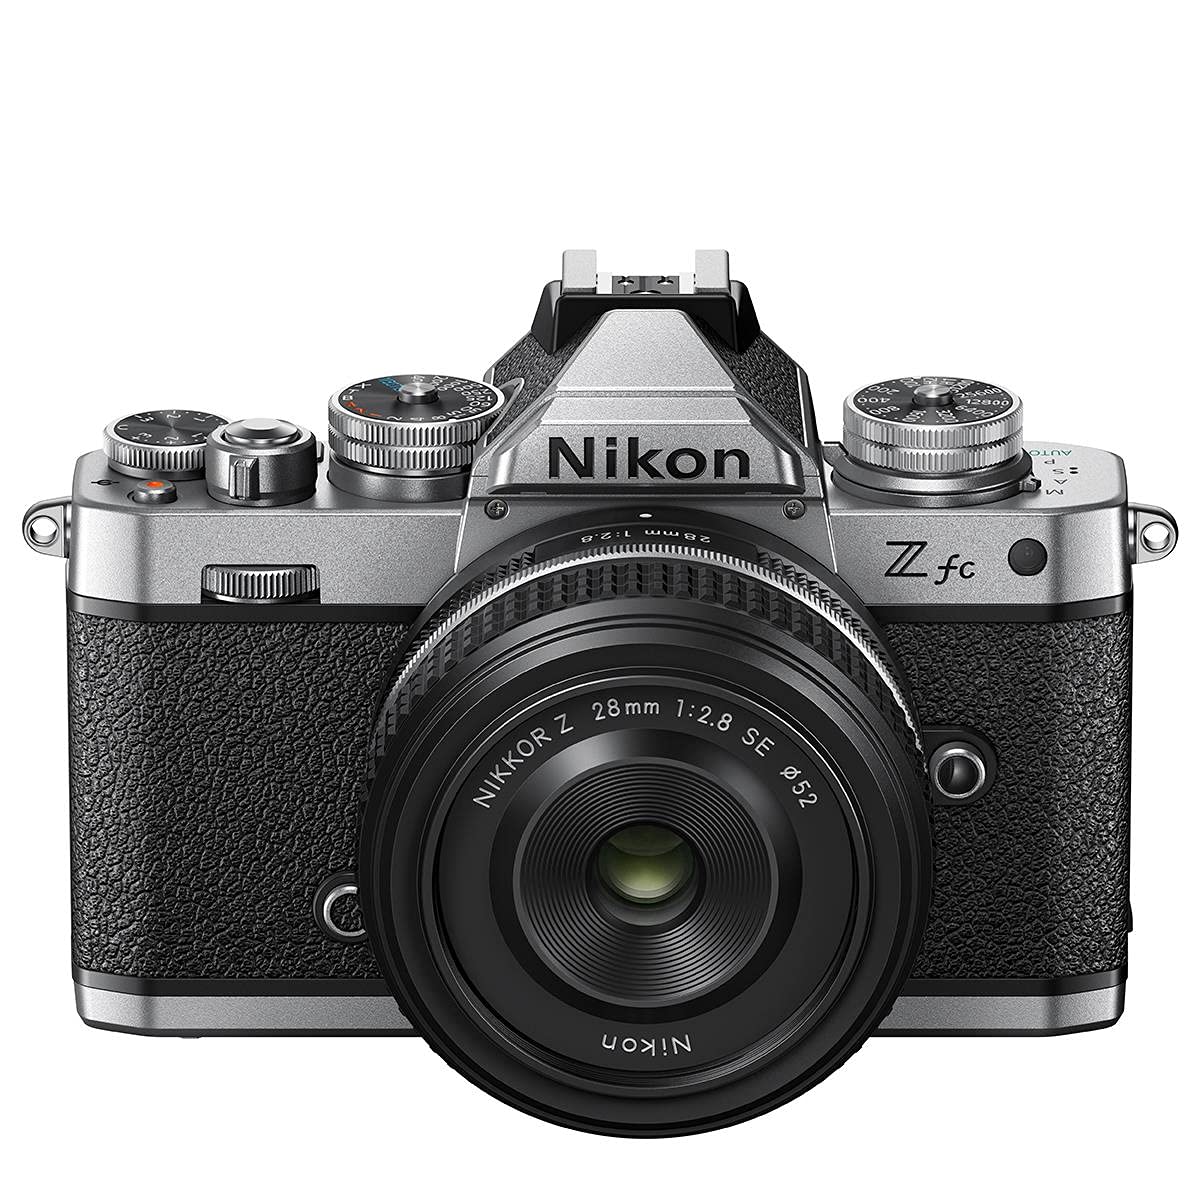 Nikon Z fc DX-Format Mirrorless Camera with NIKKOR Z 28mm f/2.8 (SE) Lens and Z DX 50-250mm f/4.5-6.3 VR Lens with FTZ II Mount Adapter